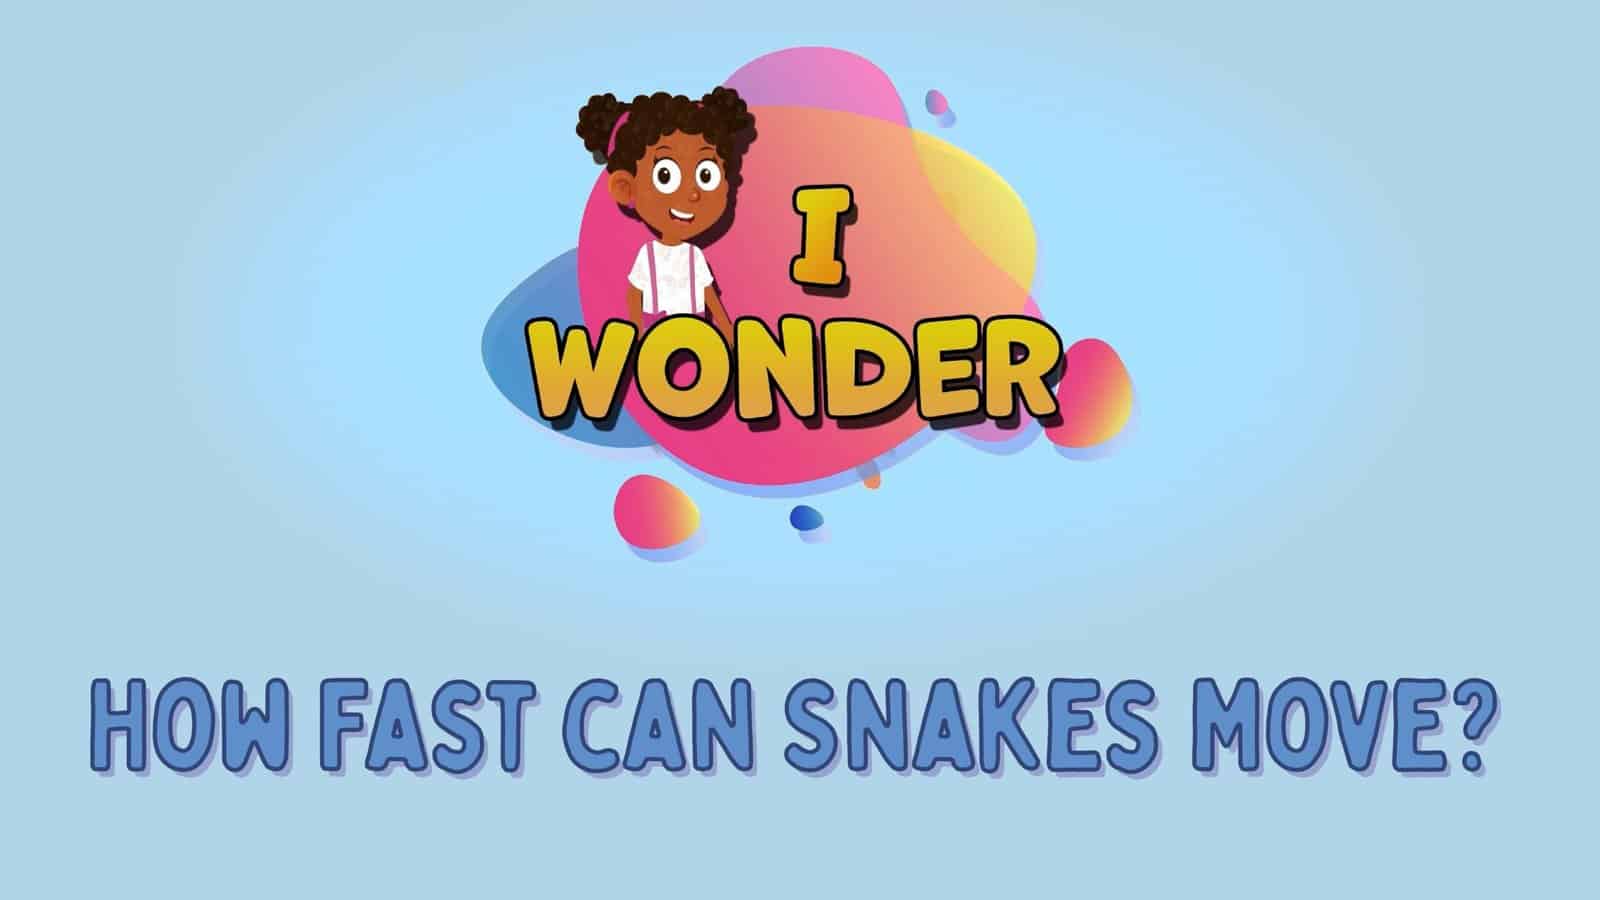 How Fast Can Snakes Move?